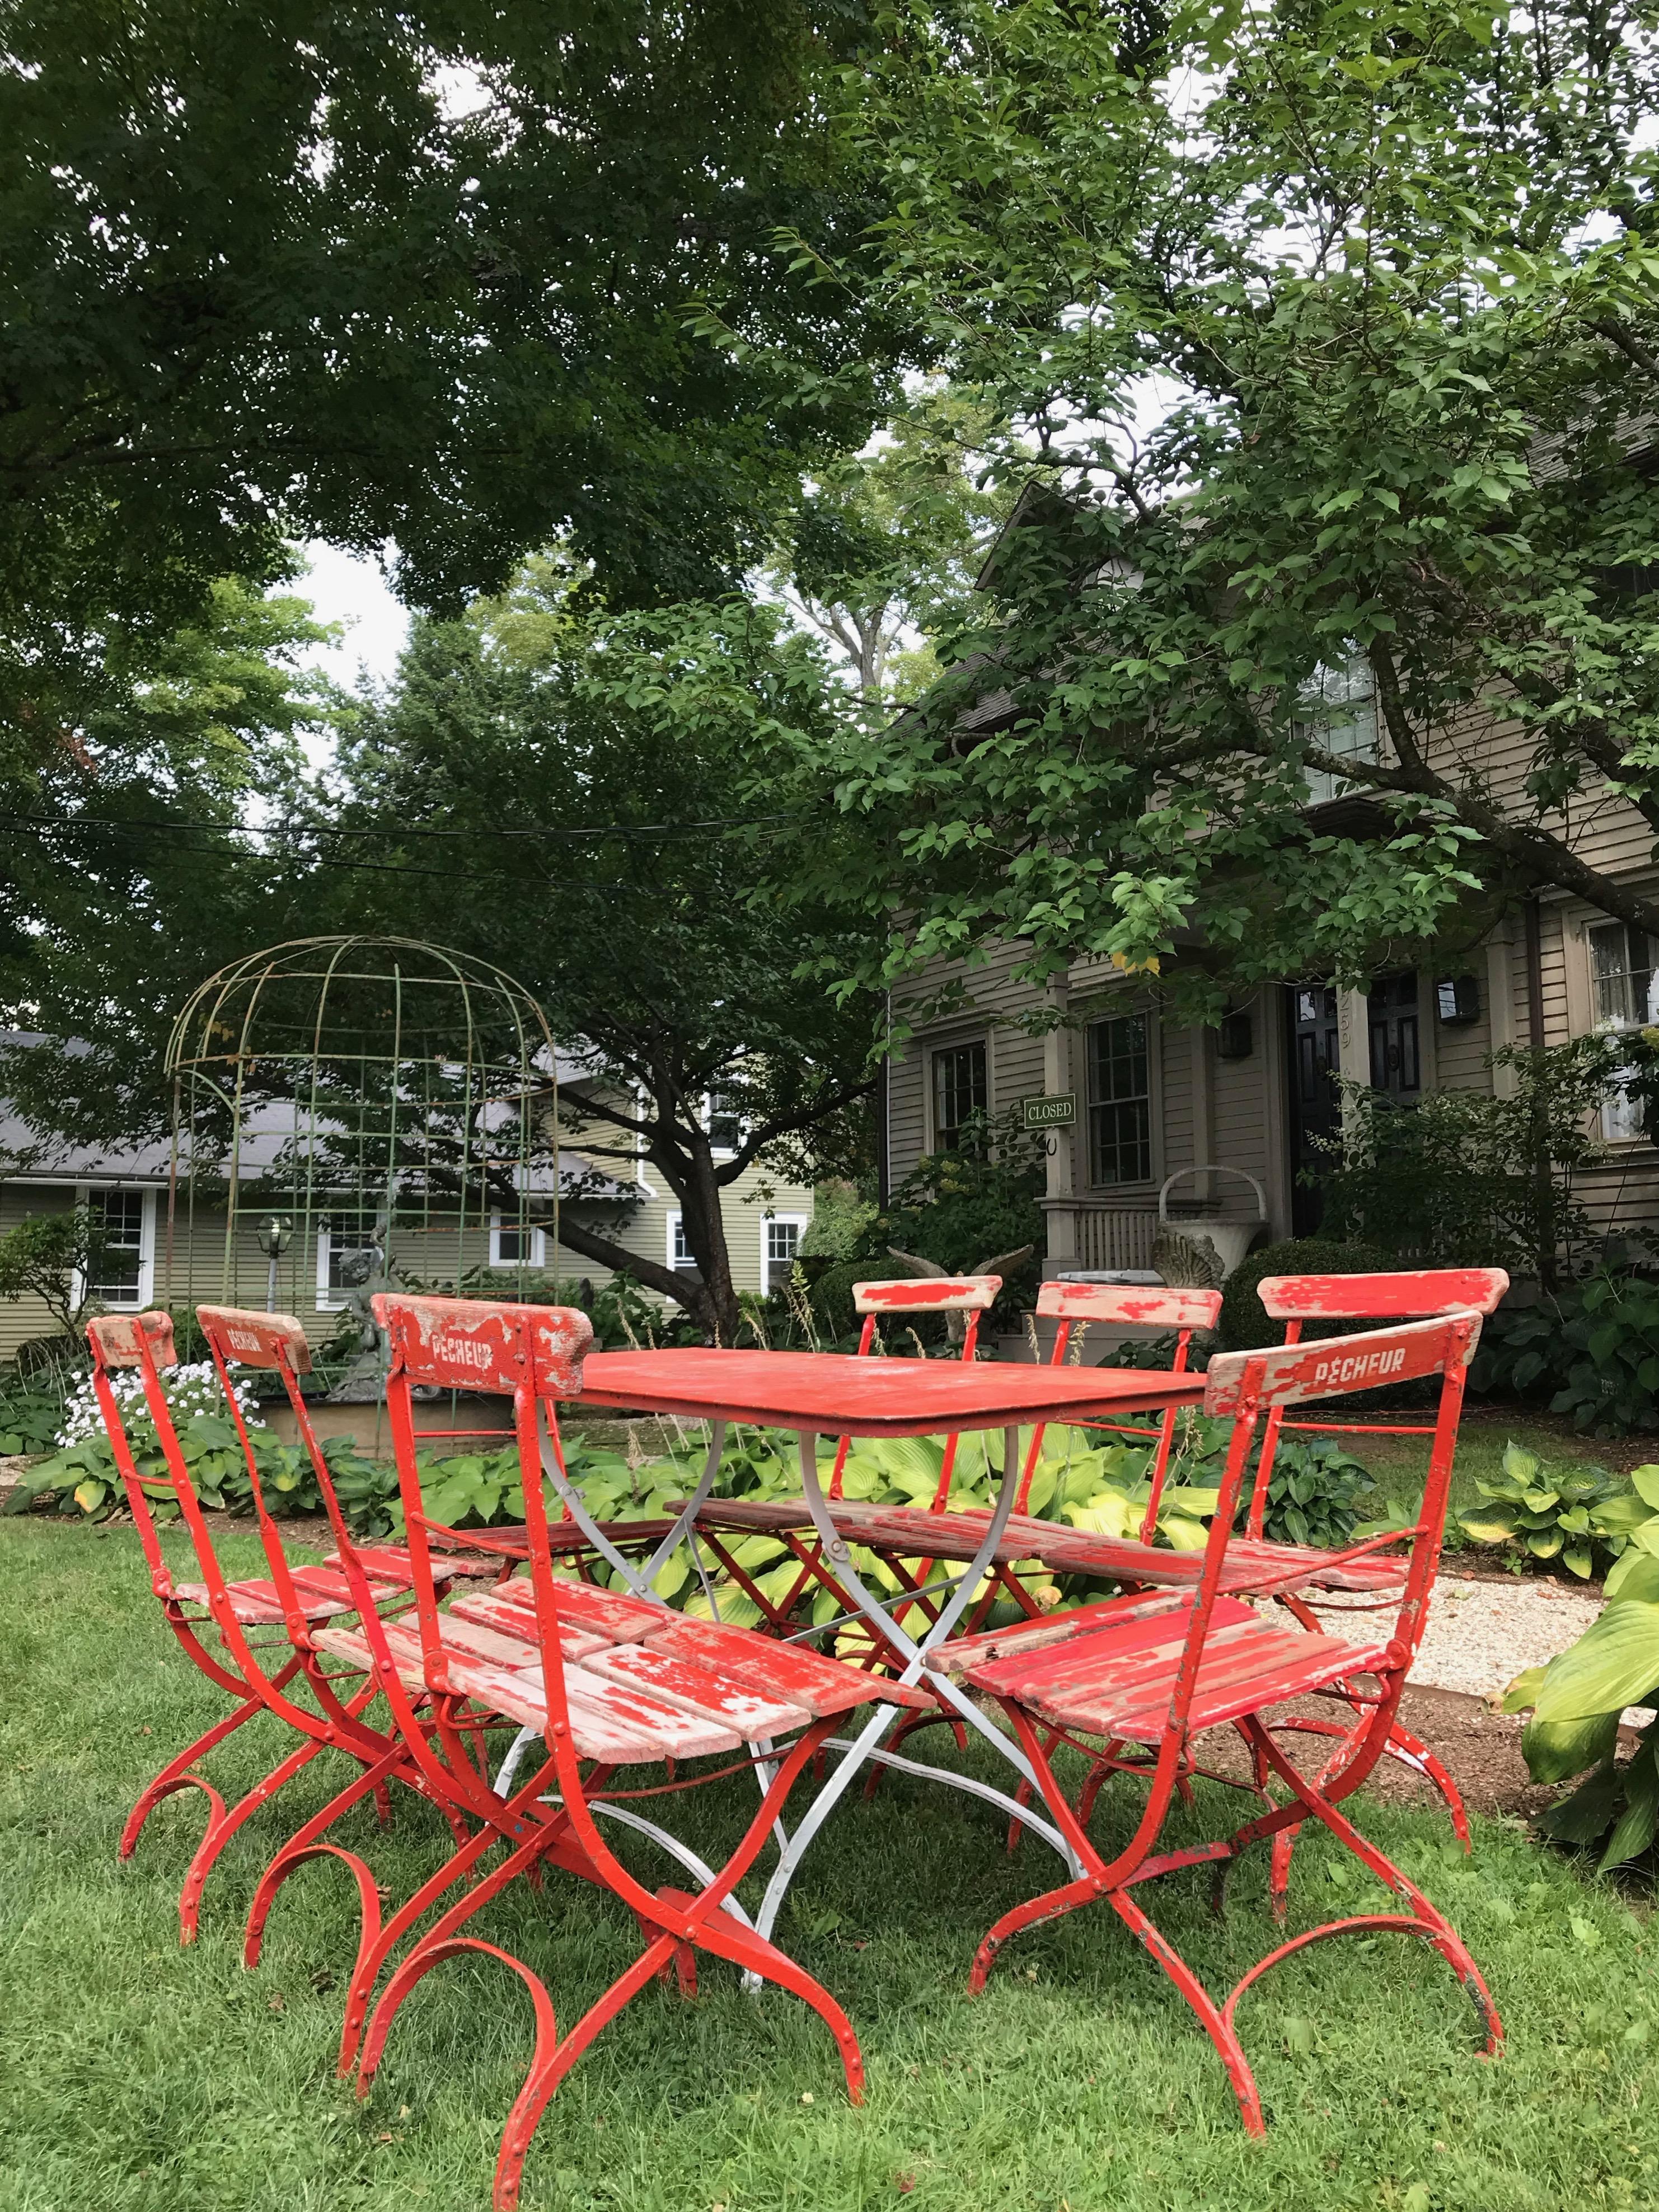 We usually don't go in for red, but this set is so outstanding in form, utility and patina, we couldn't resist. The chairs, most of which have a slight wobble to their legs from decades of use, are made of oak with all original riveting to the